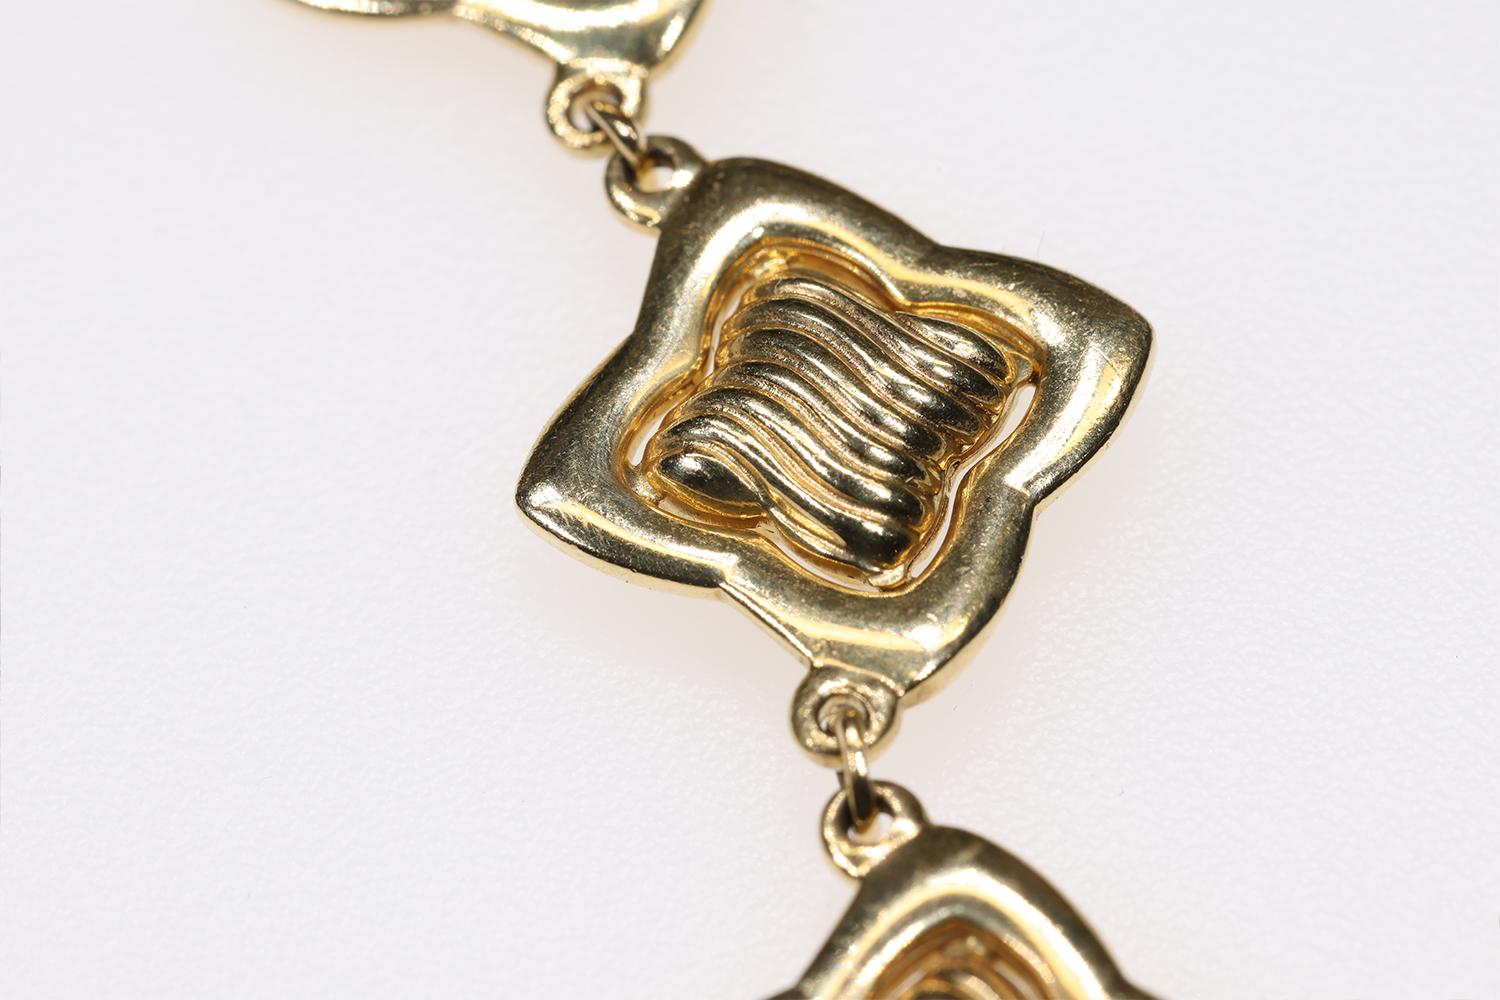 Rare David Yurman Quatrefoil 18K Solid Yellow Gold Necklace Limited Series Piece For Sale 2